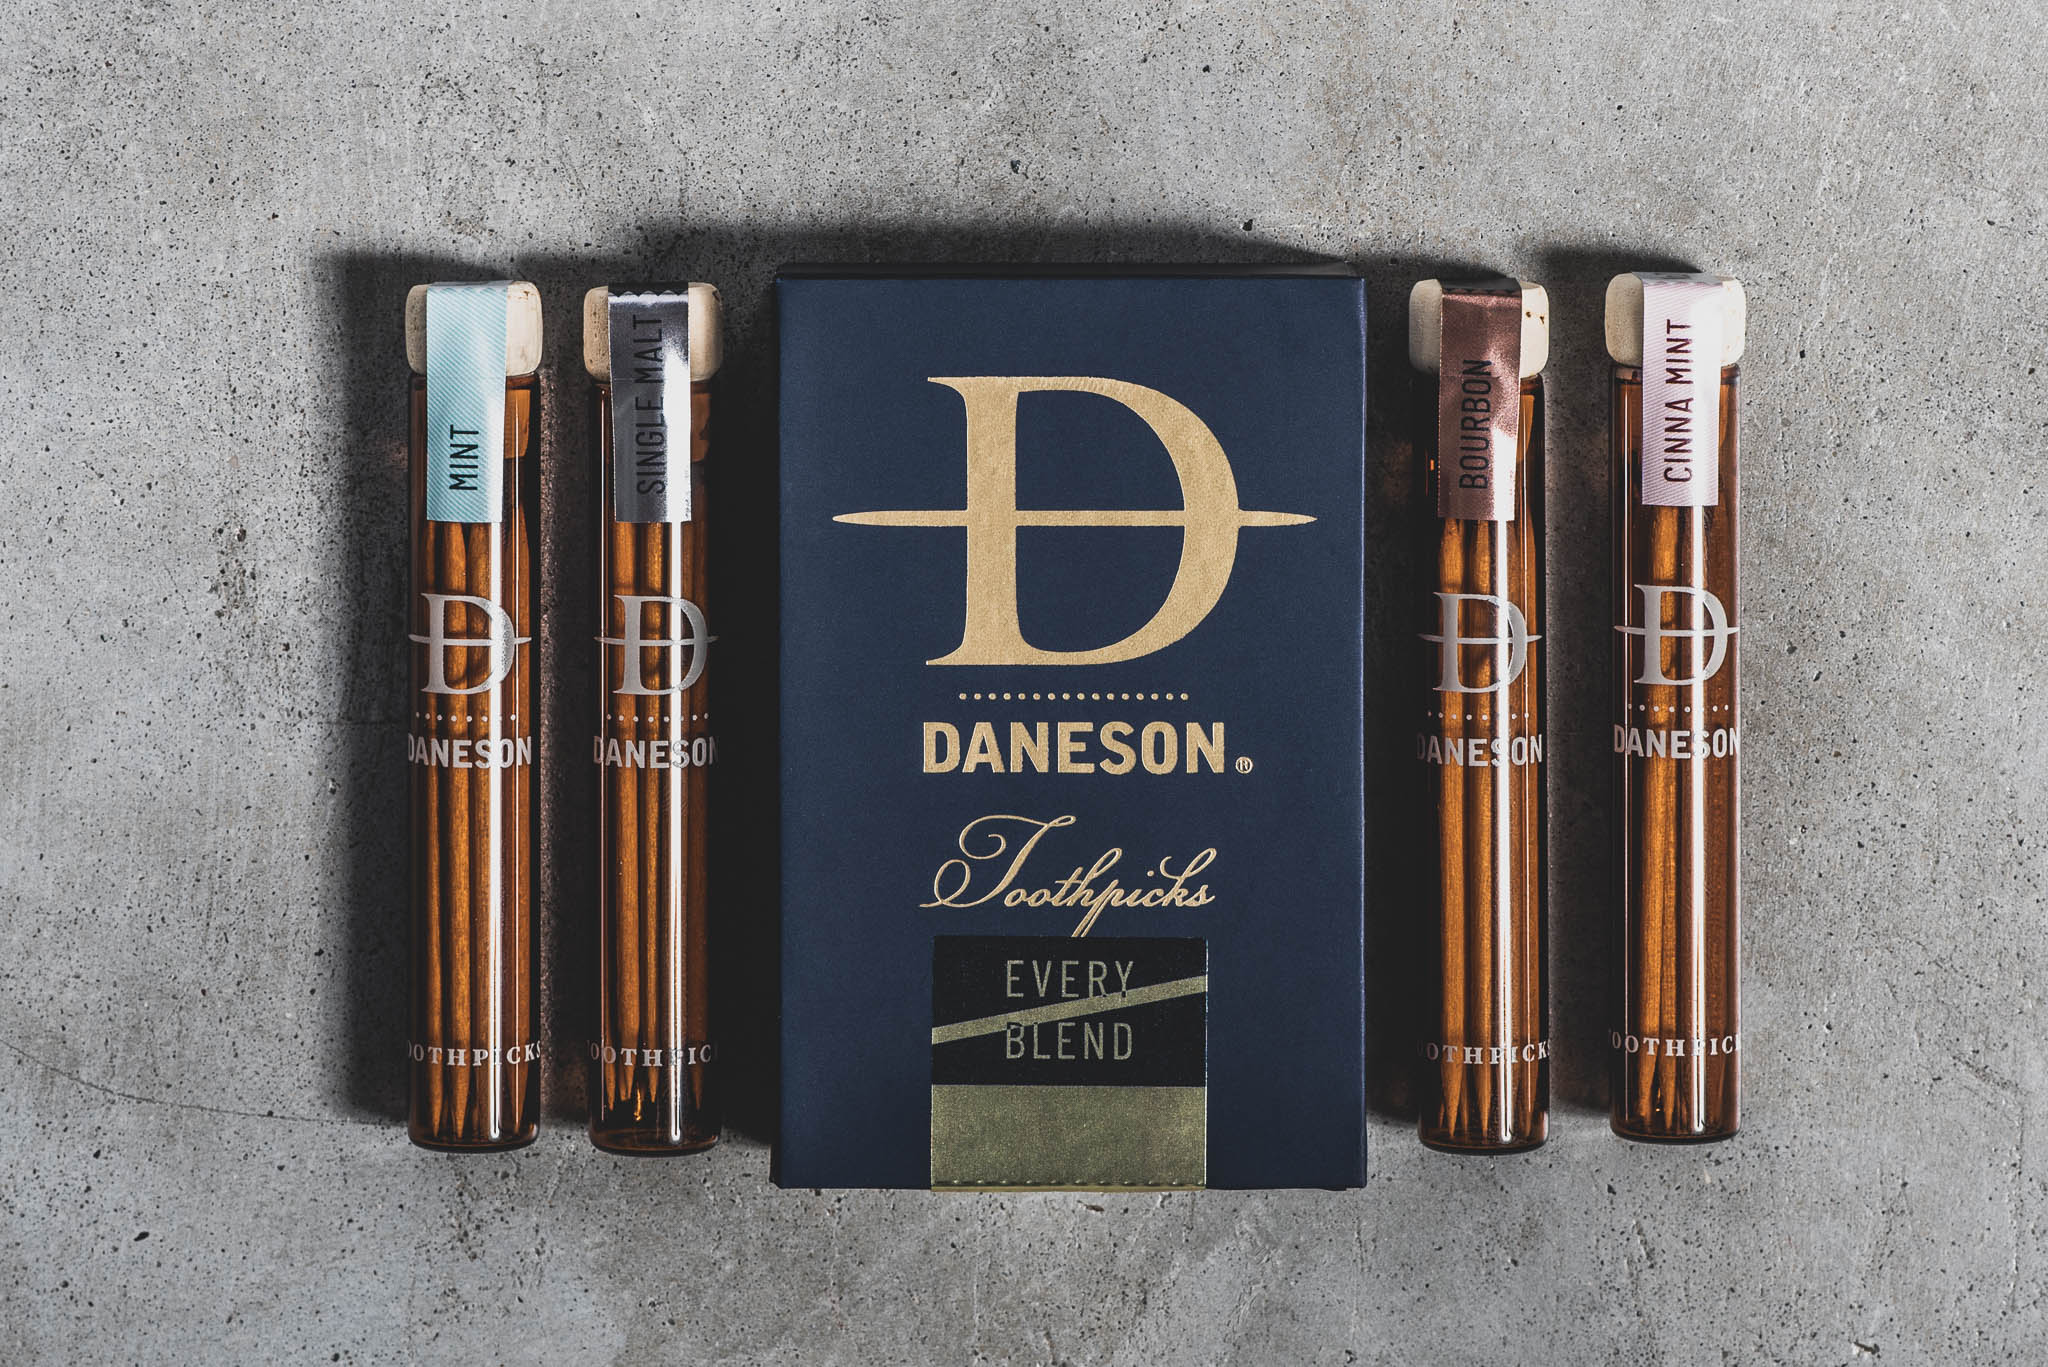 Every Blend Toothpick Variety Pack | Daneson